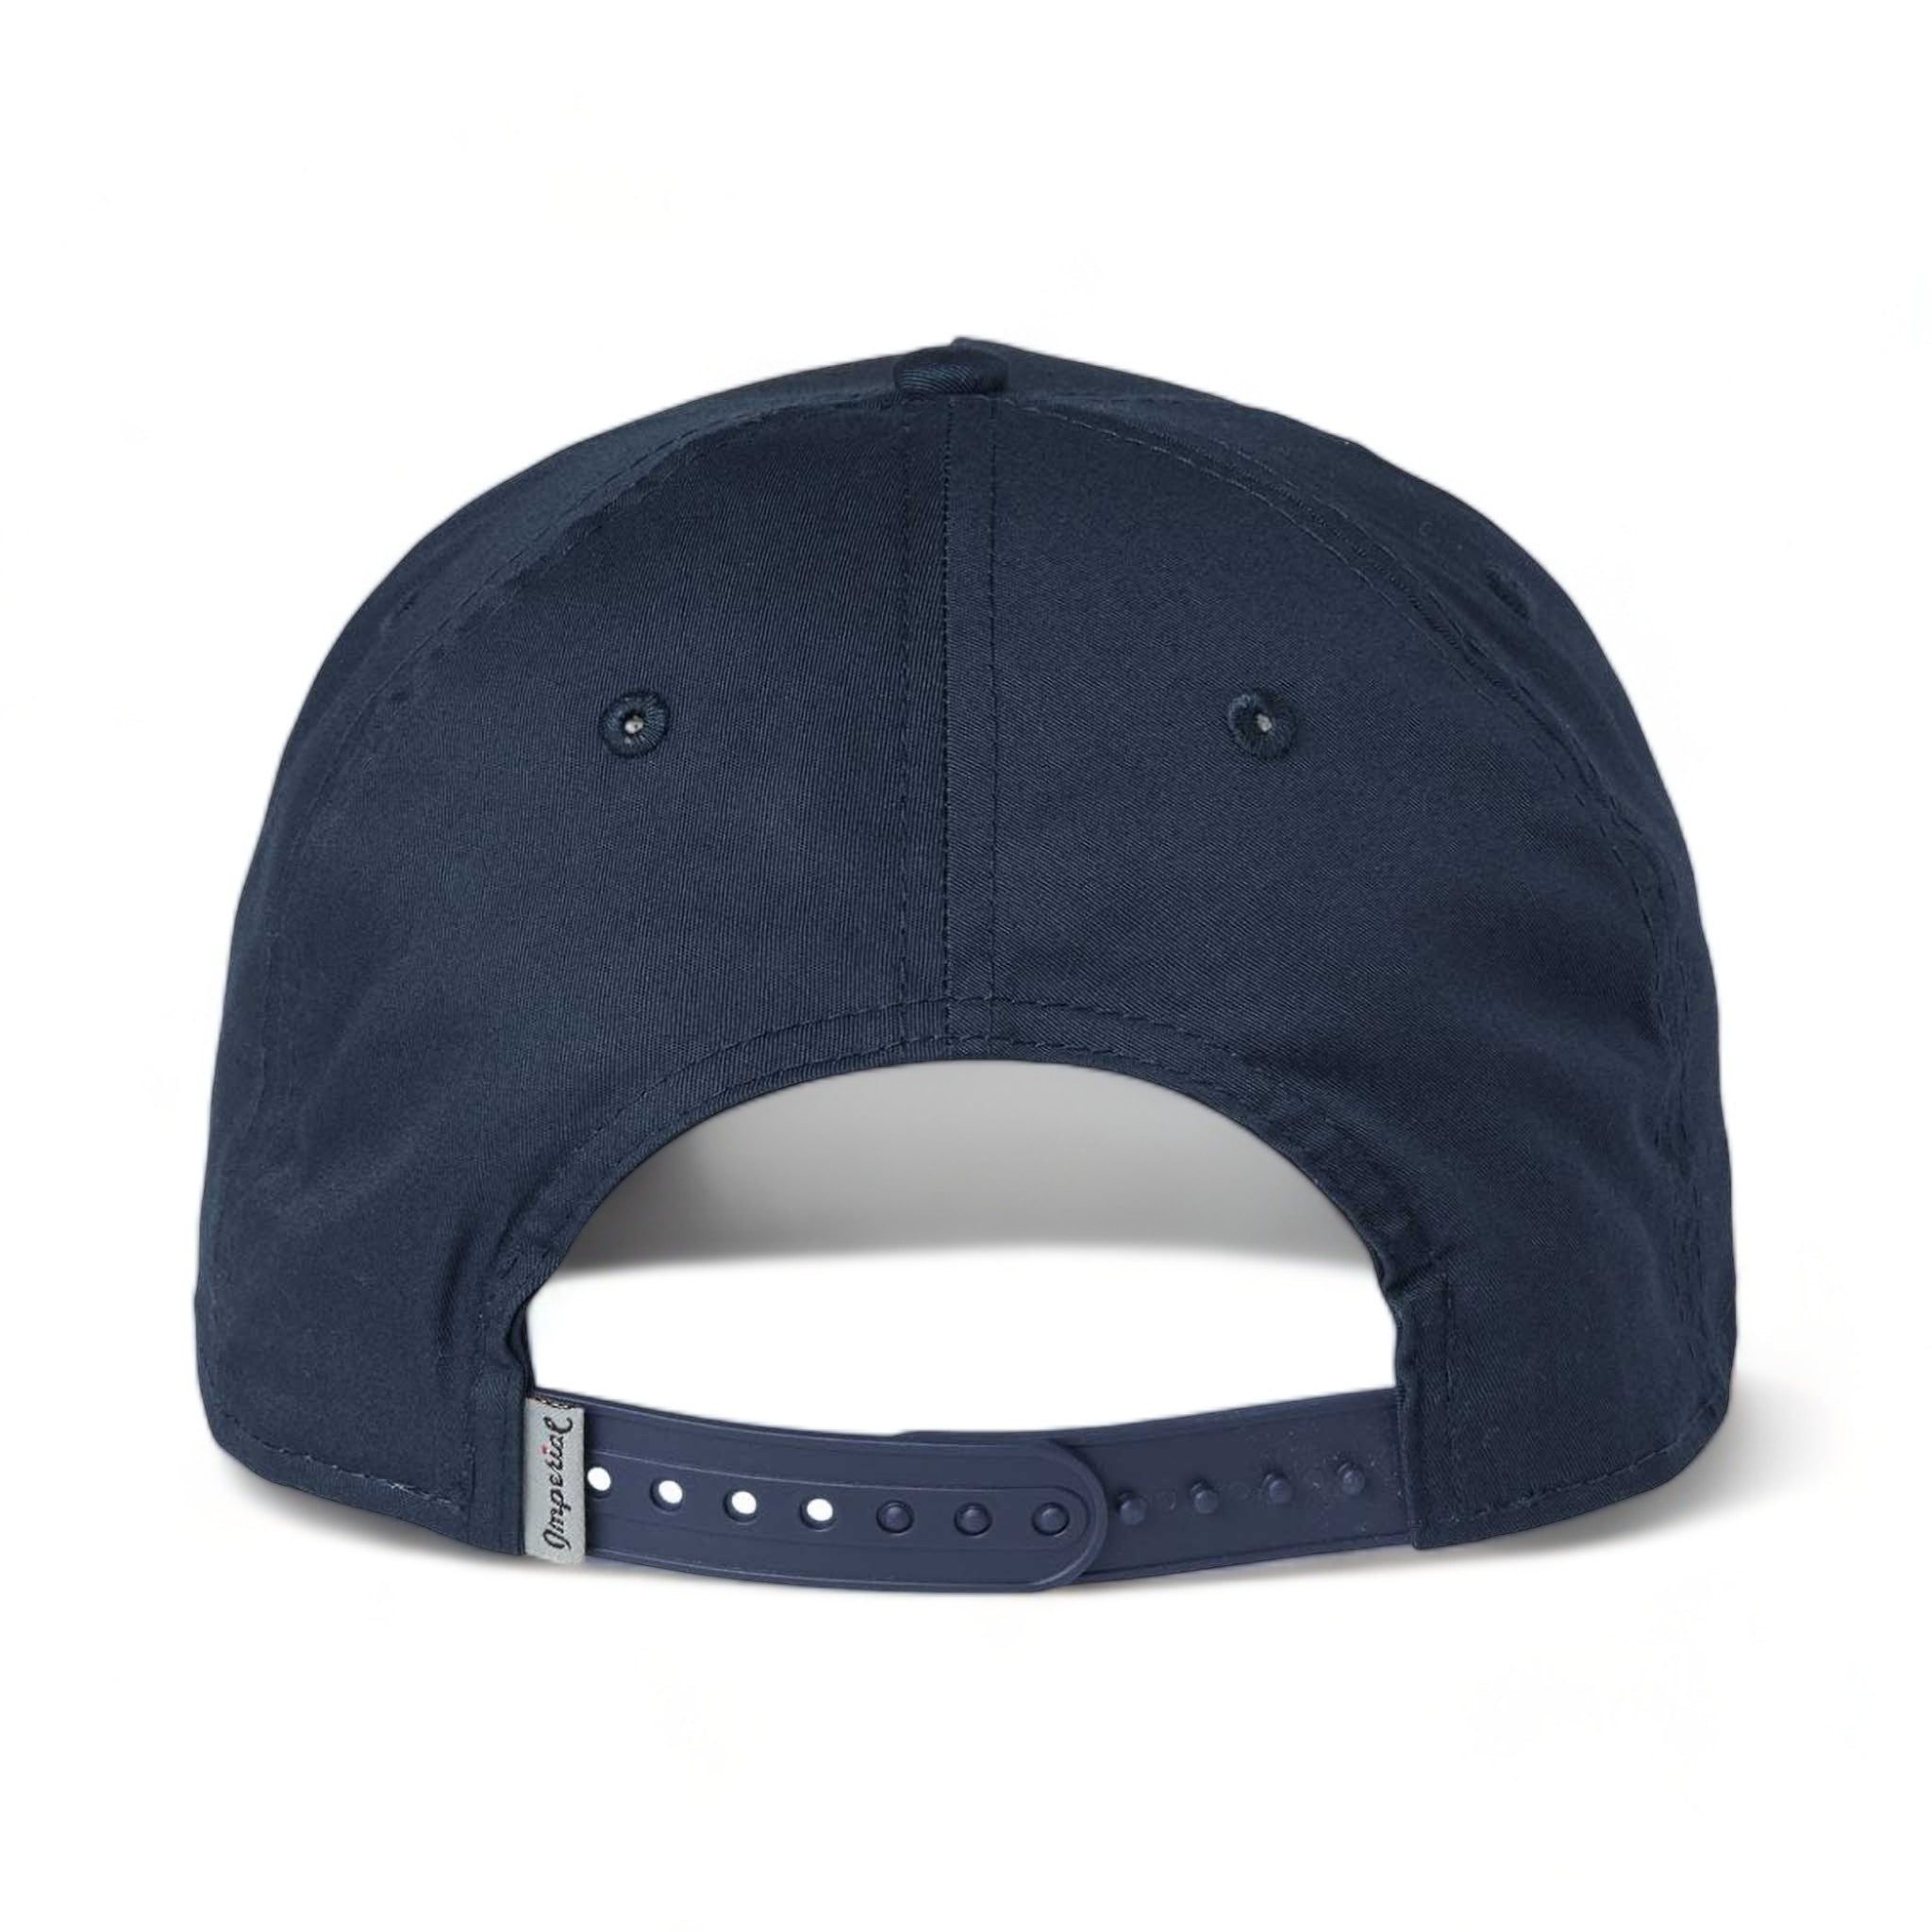 Back view of Imperial 5056 custom hat in navy and white